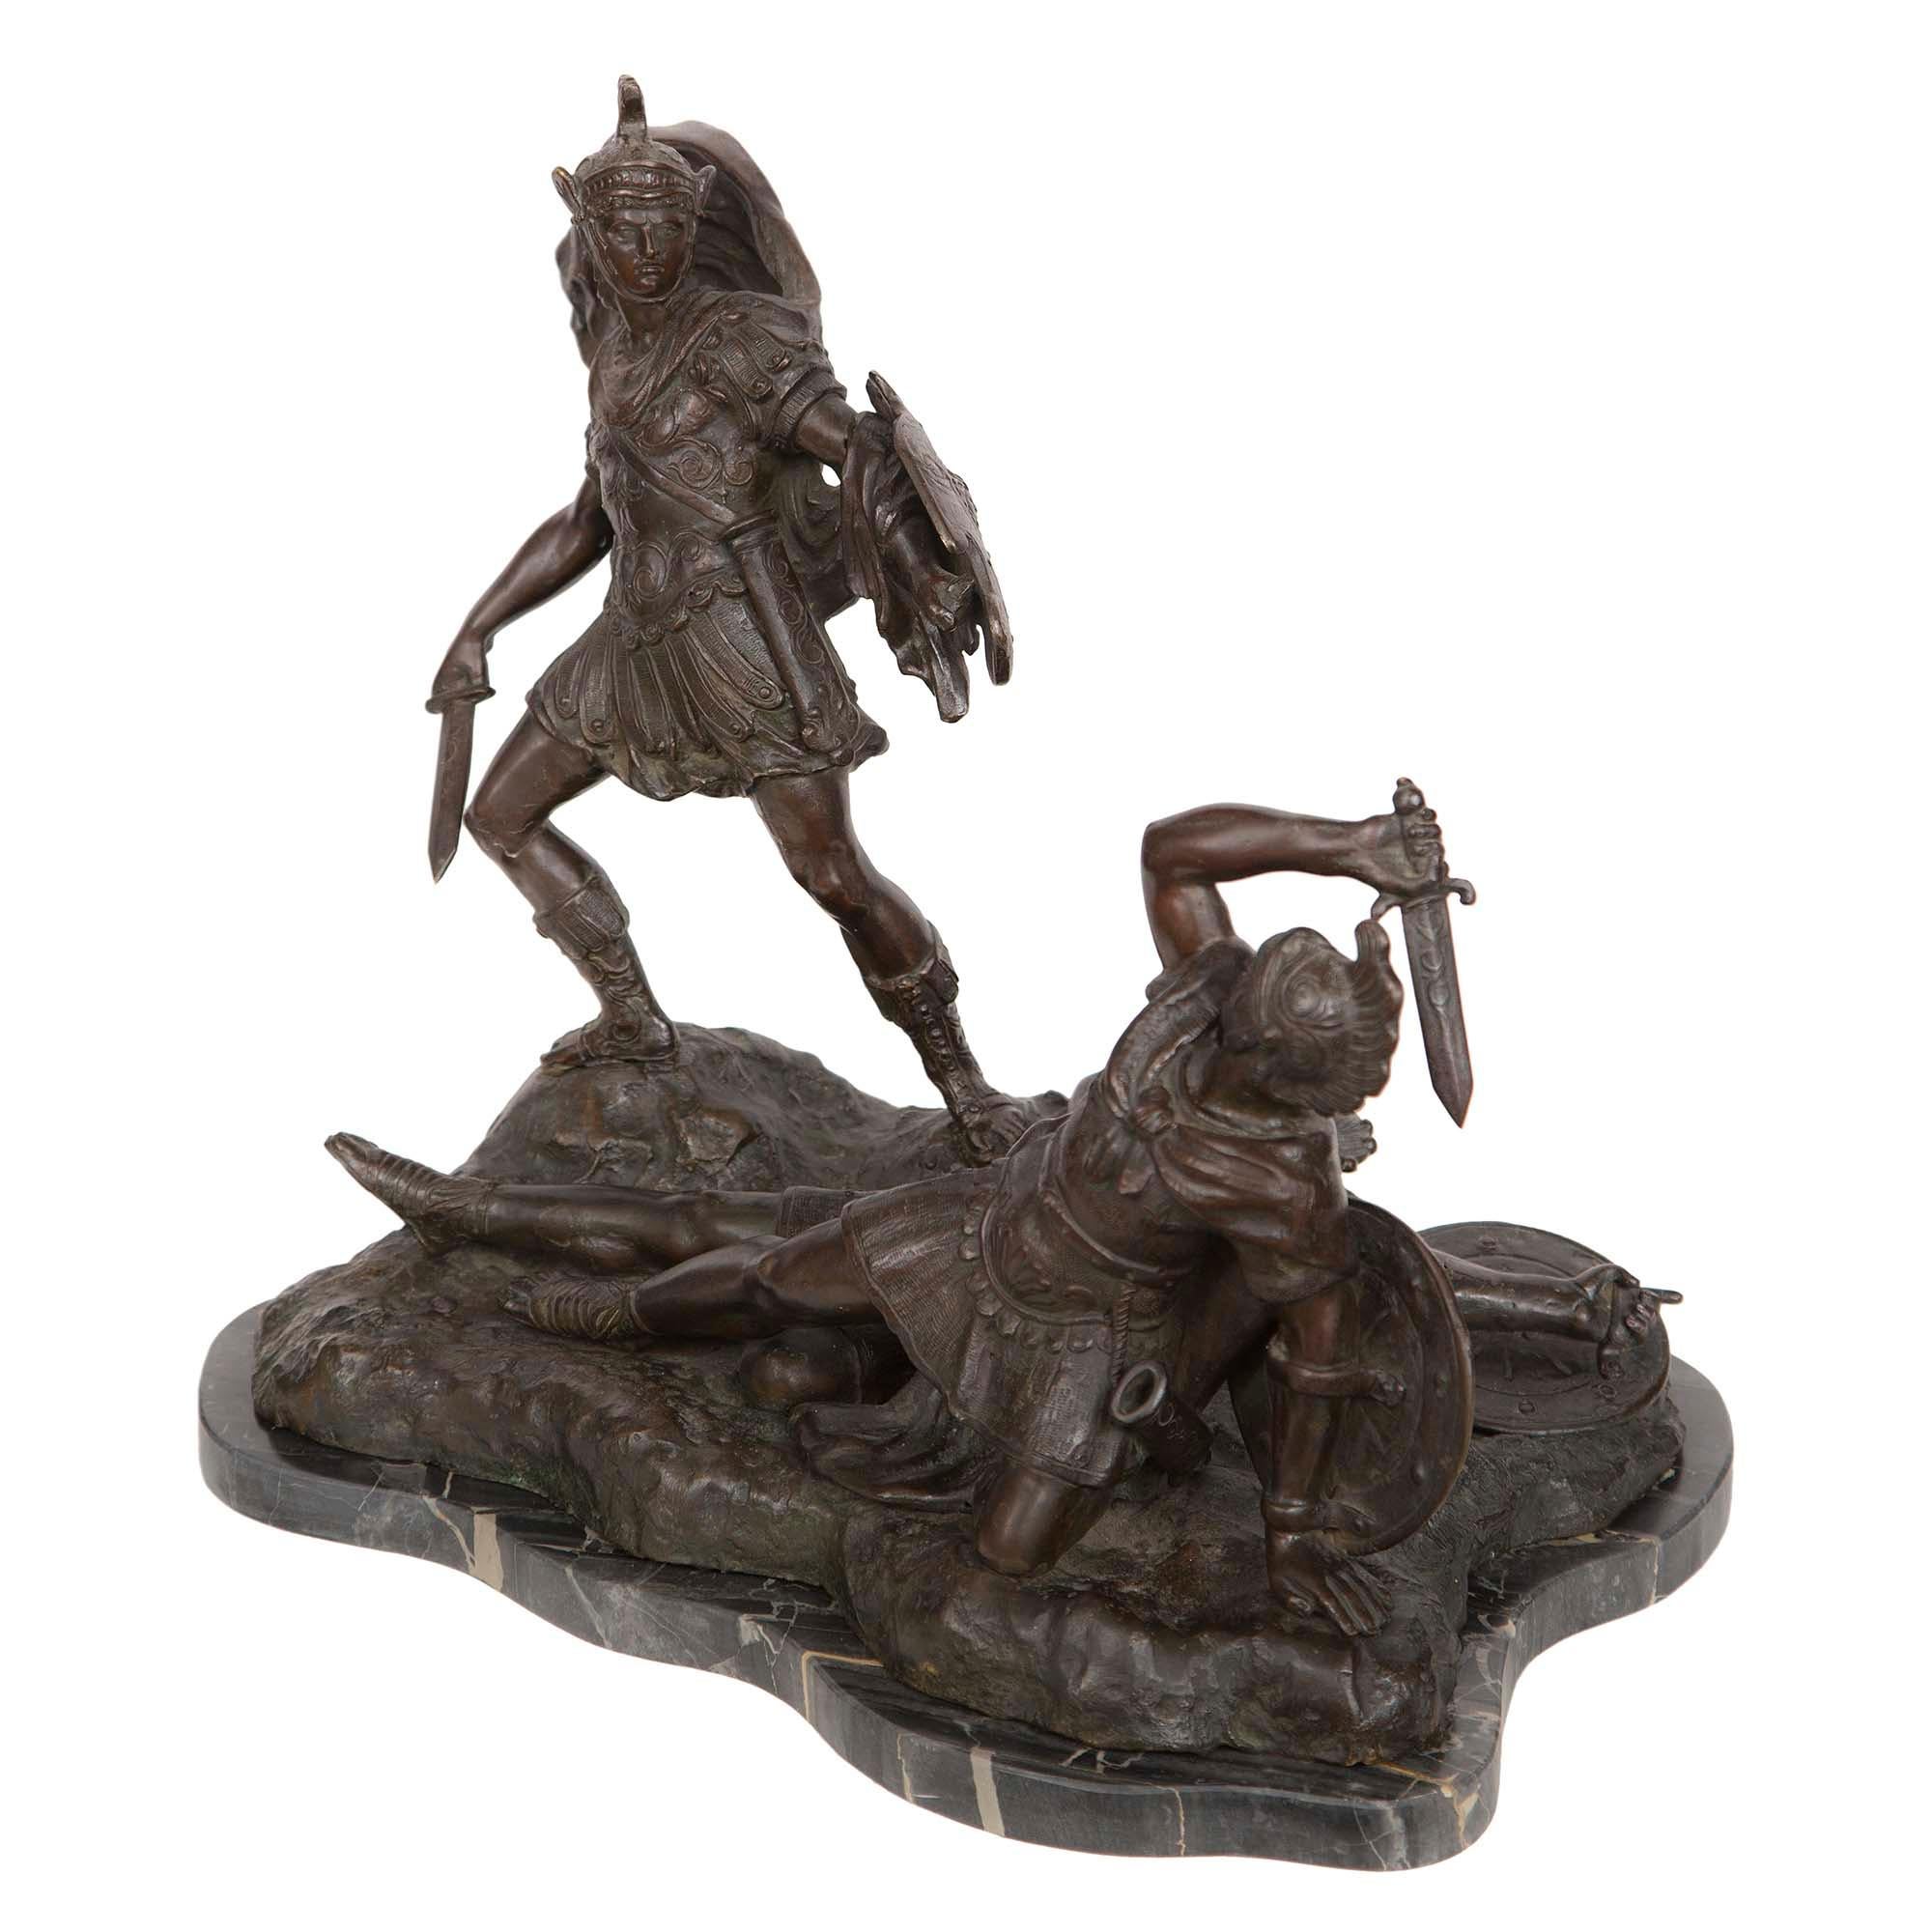 A handsome Italian 19th century neoclassical patinated bronze and Portoro marble statue of soldiers fighting signed. The statue is raised by a scalloped shaped Portoro marble base mimicking the shape of the bronze above. Set on a ground like design